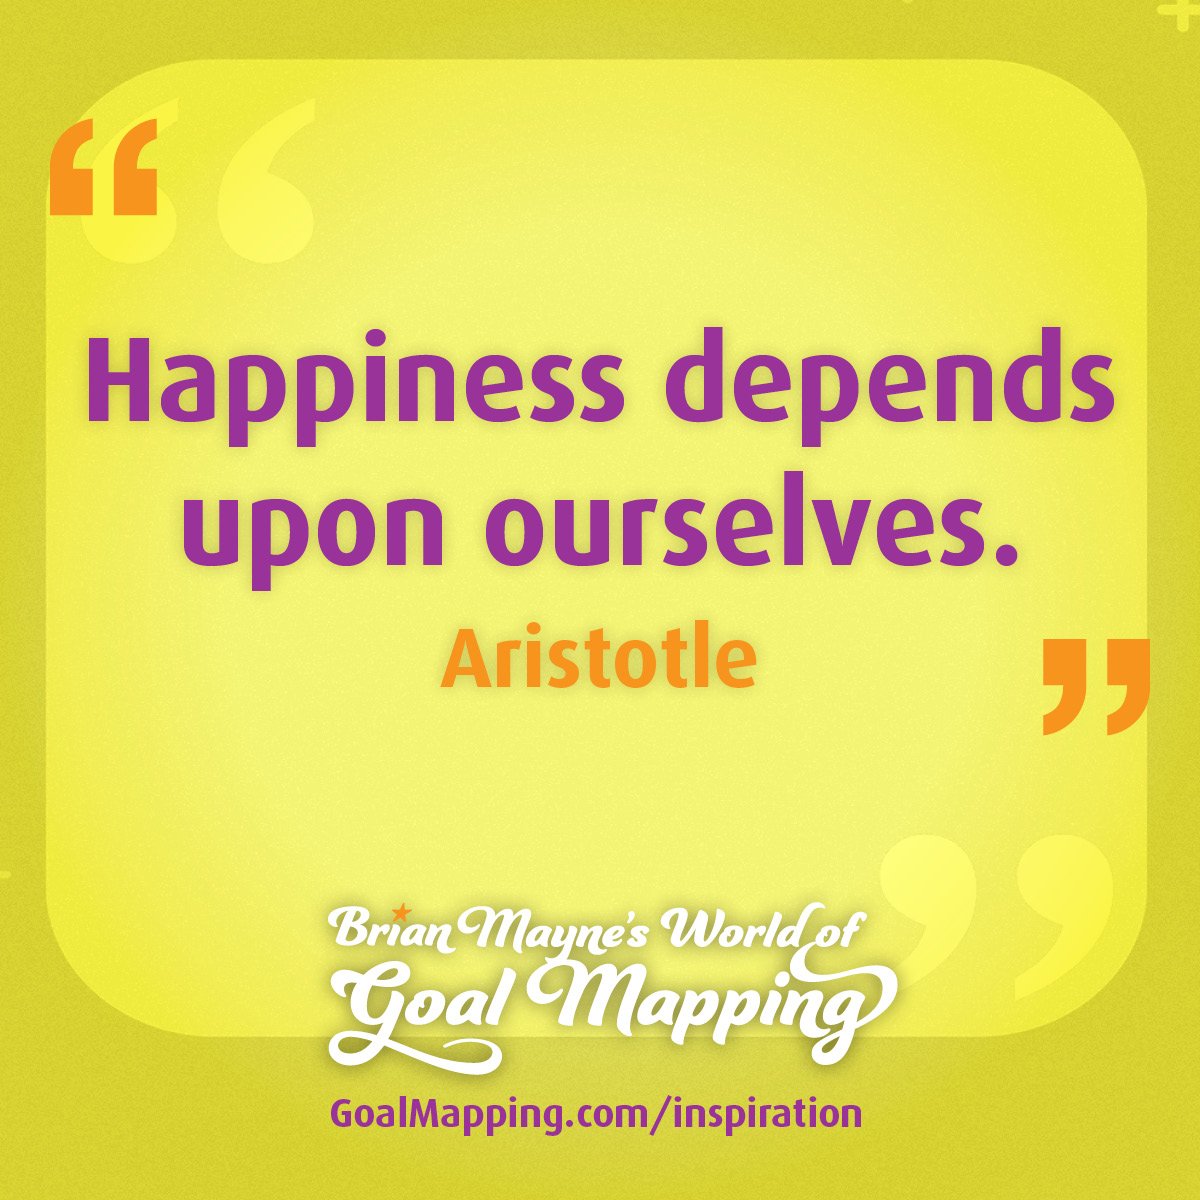 "Happiness depends upon ourselves." Aristotle